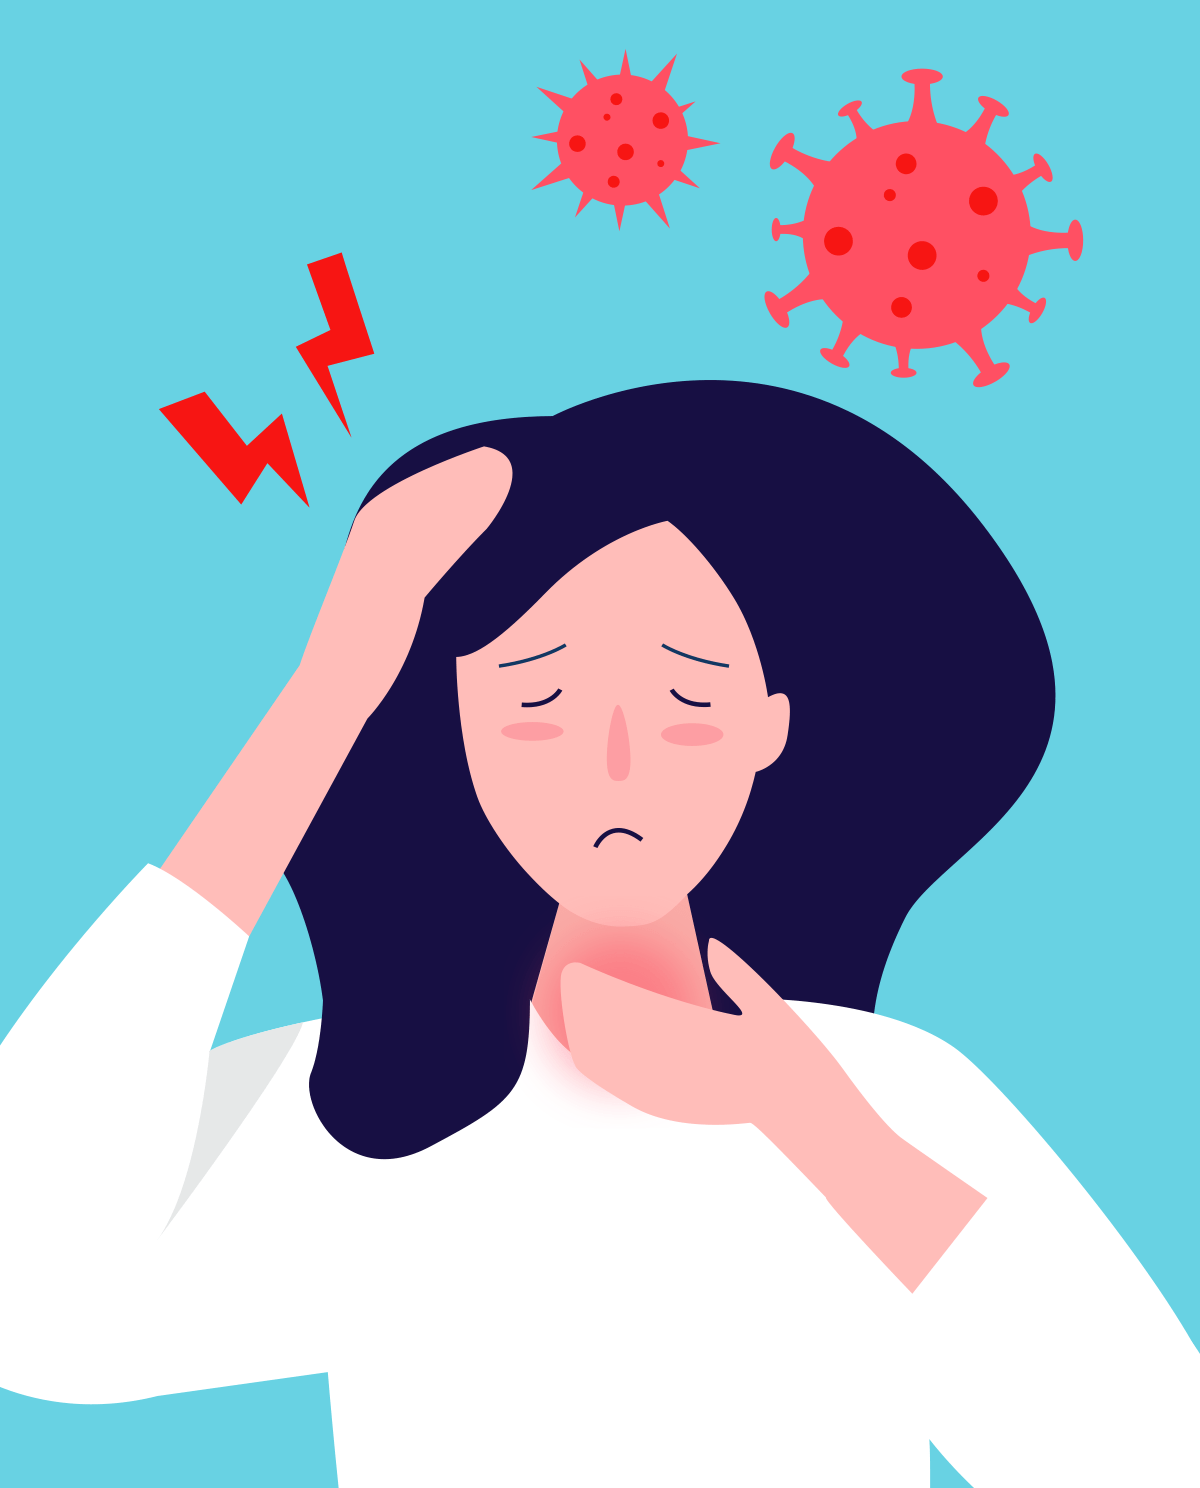 What do you need to know about influenza?